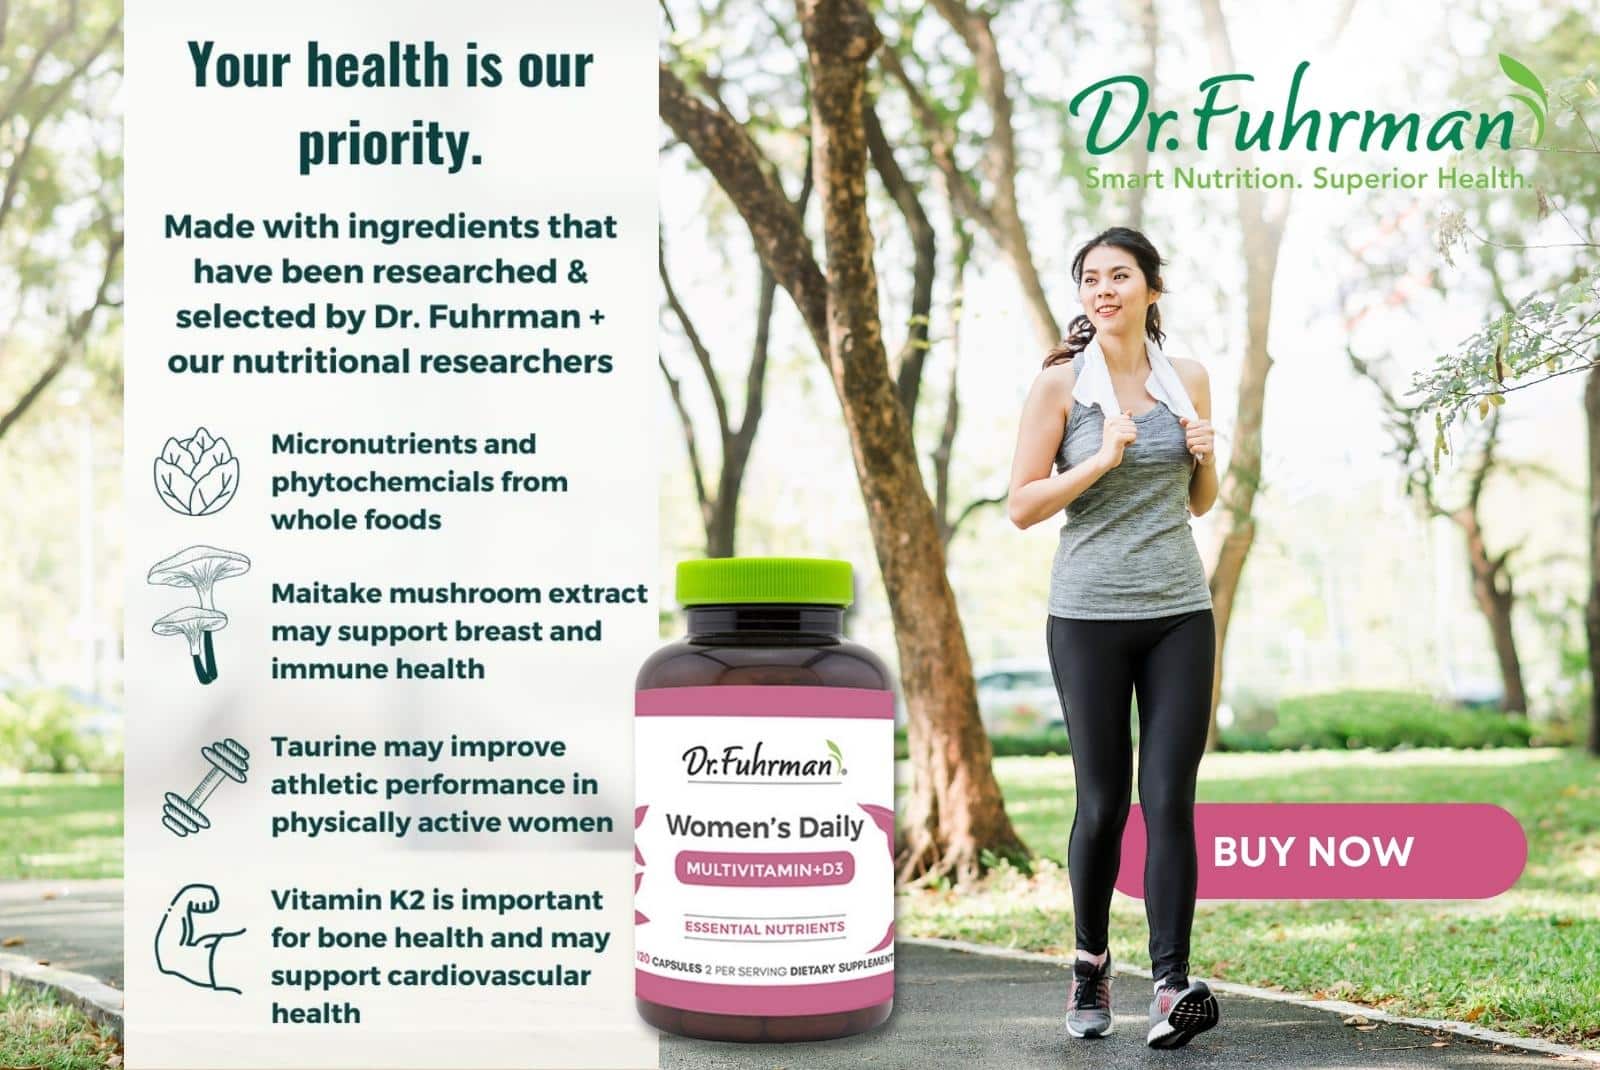 Click here to get Dr. Fuhrman's Women's Daily supplement